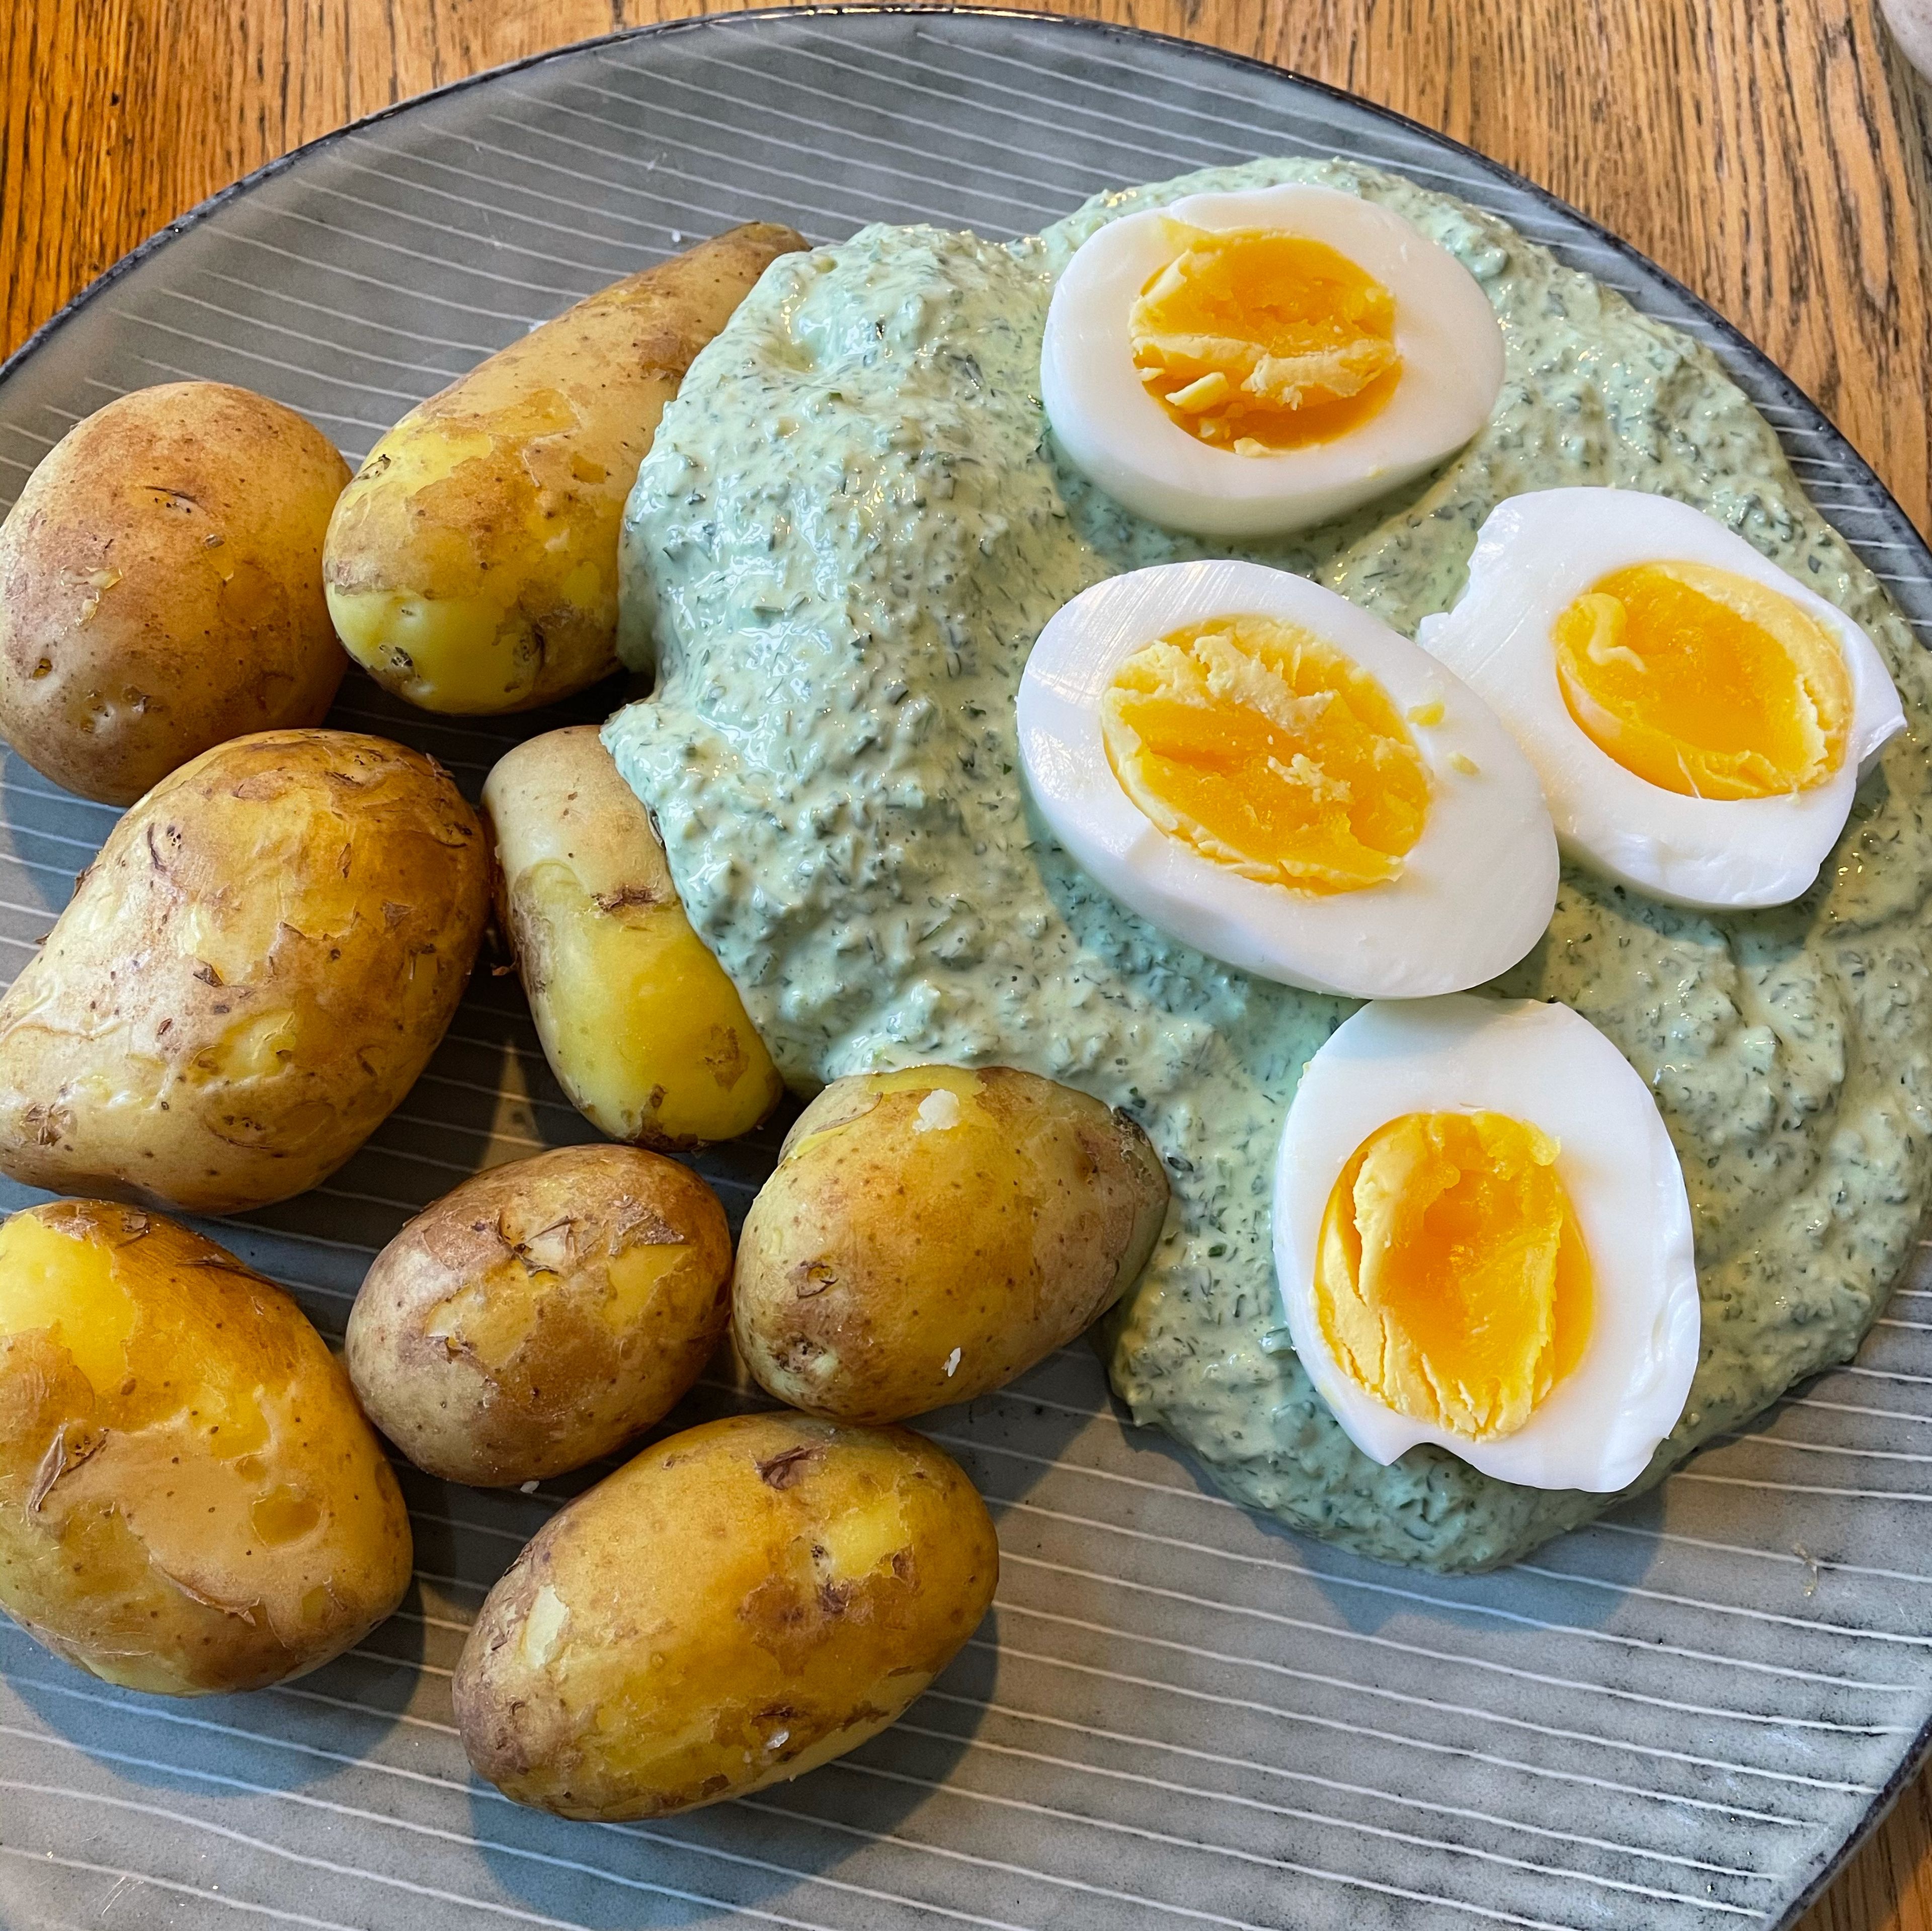 Serve the green sauce cold. Classically with boiled and halved eggs and boiled potatoes or breaded schnitzel, which is thereby upgraded to "Frankfurter Schnitzel". However, the sauce also goes well with fried or smoked salmon or cold roast meat.